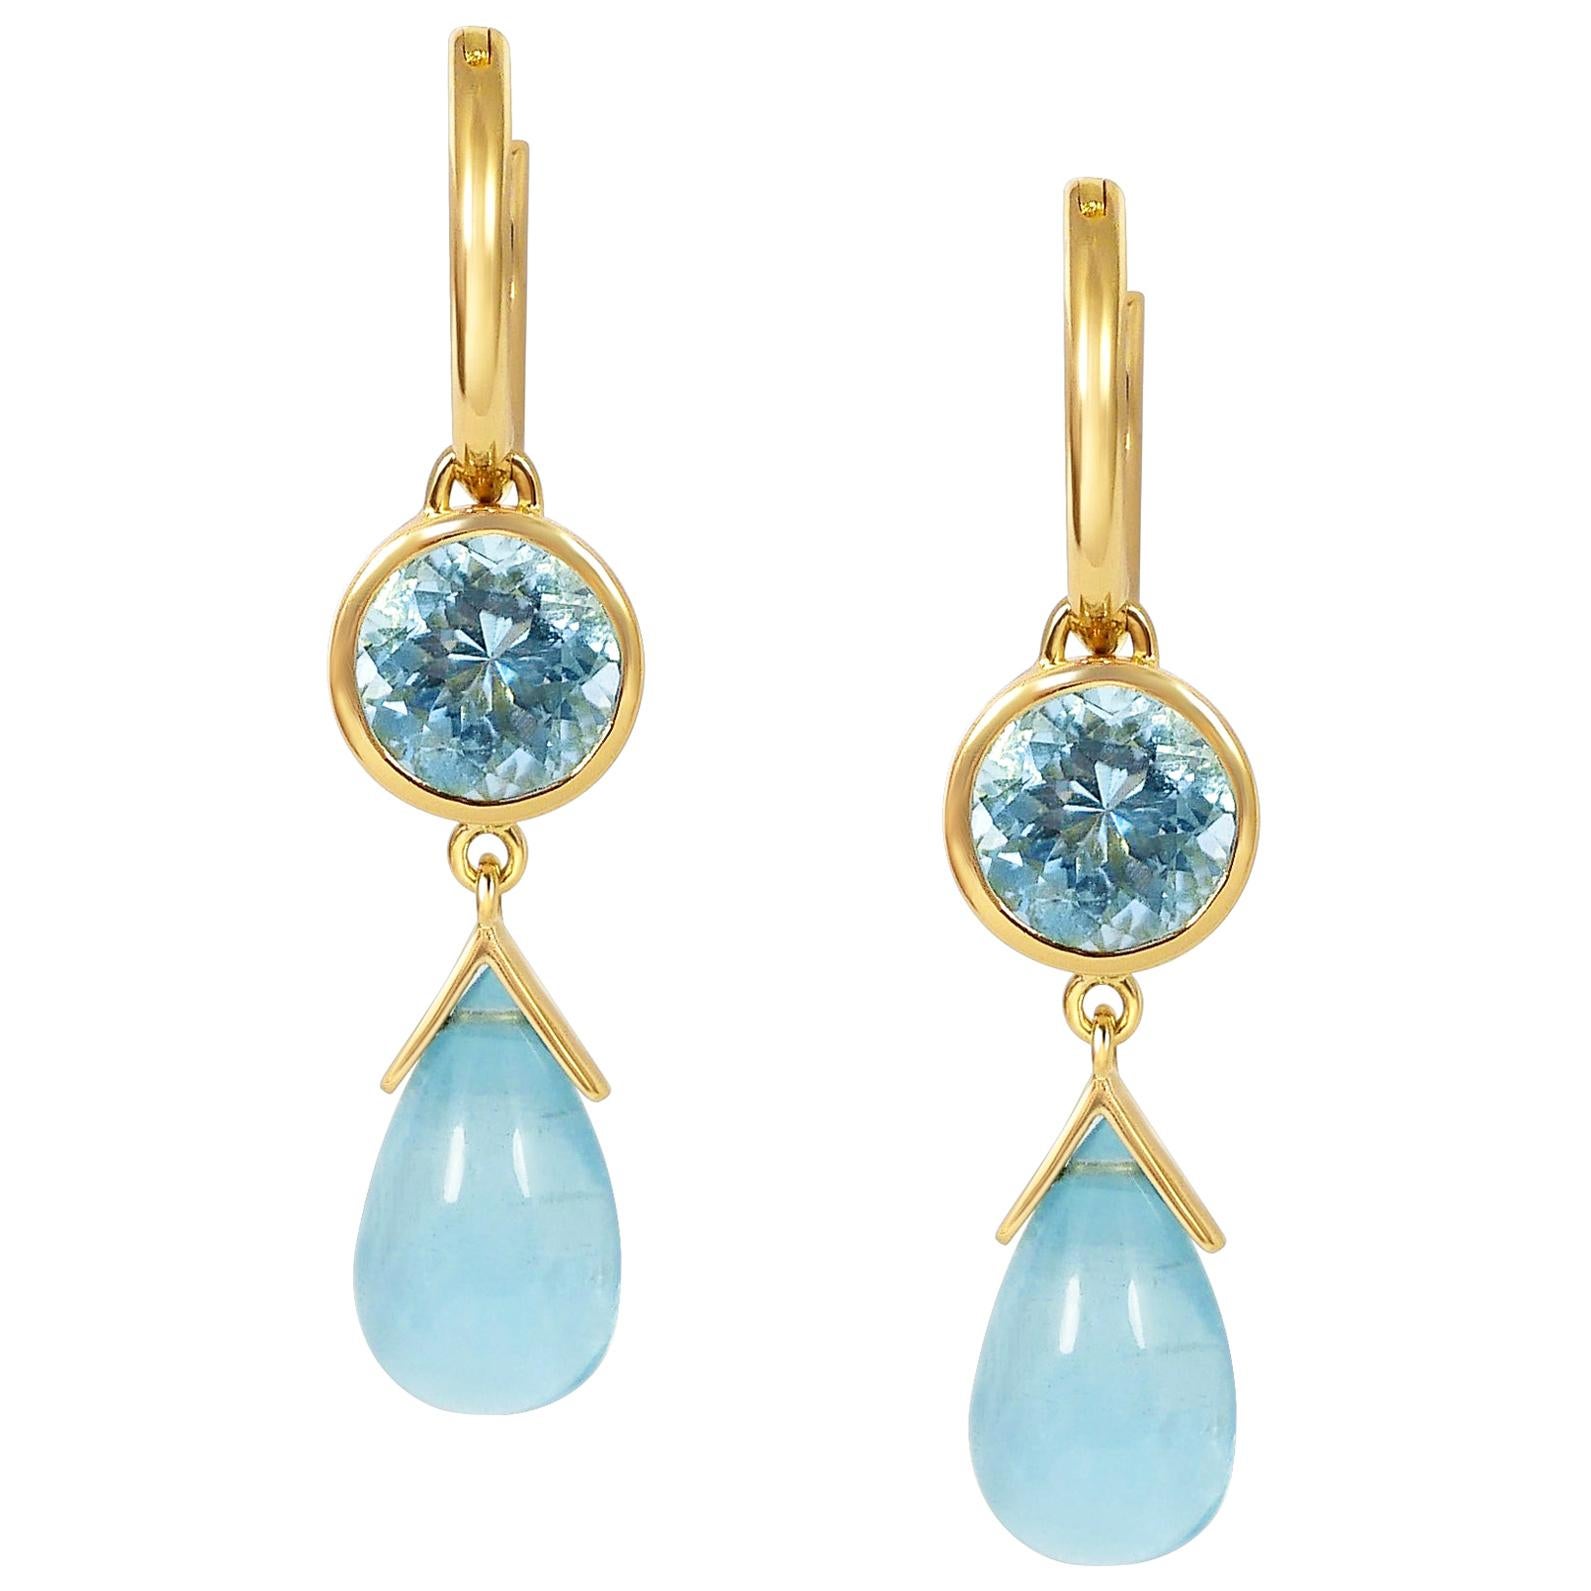 Handcrafted 2.70 & 4.40 Carats Aquamarines 18 Karat Yellow Gold Drop Earrings For Sale